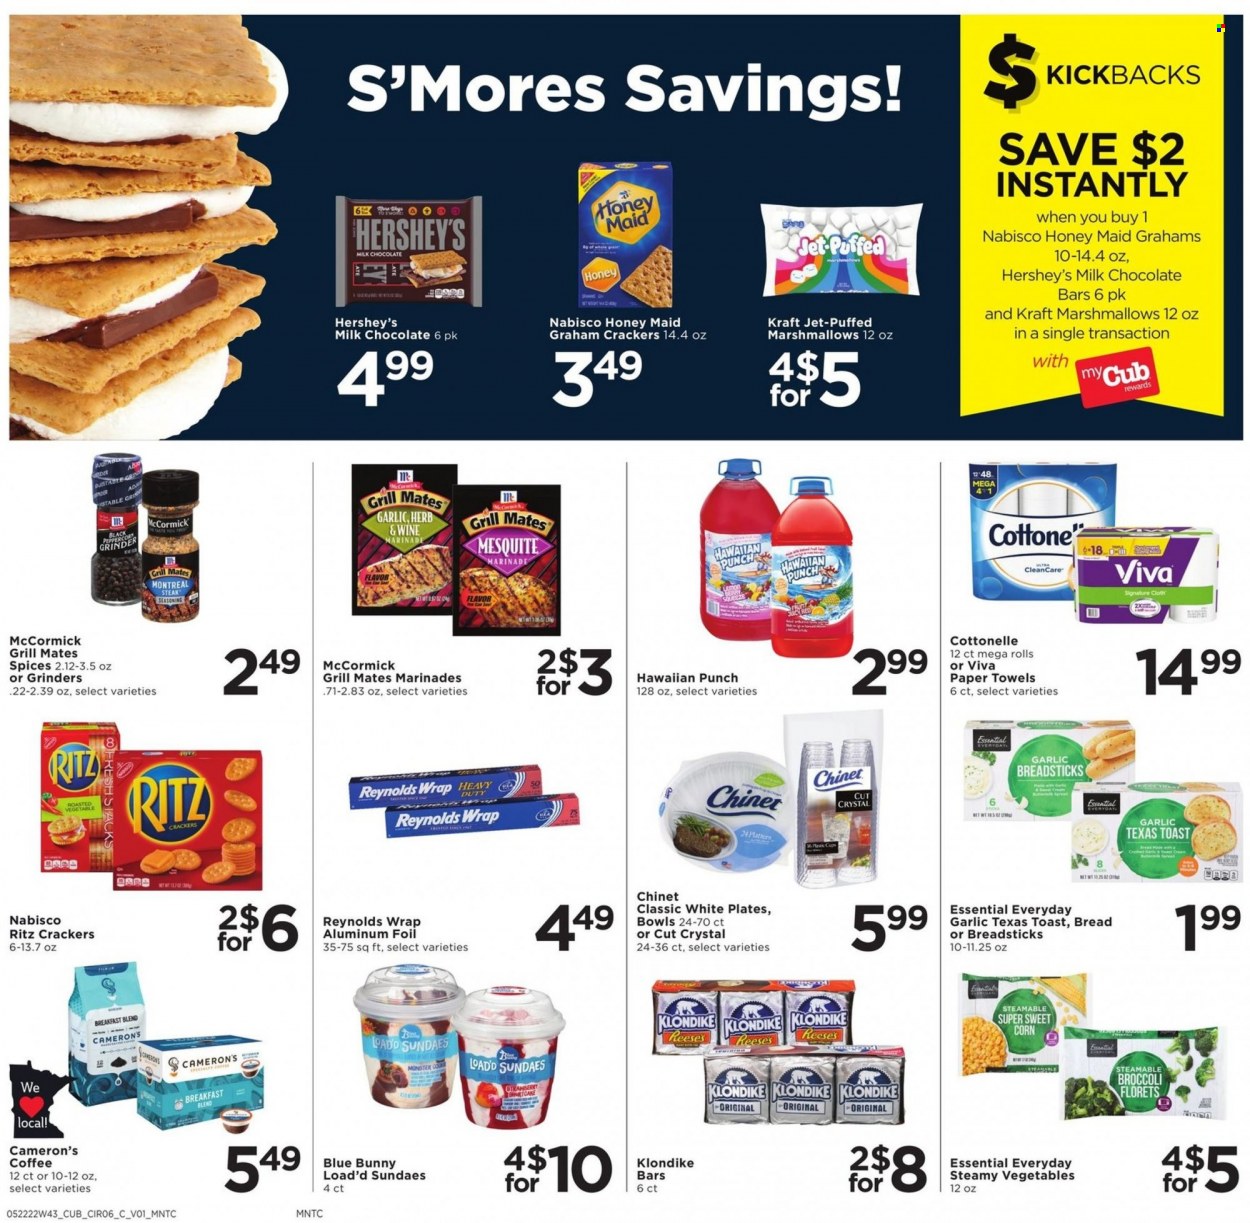 thumbnail - Cub Foods Flyer - 05/22/2022 - 05/28/2022 - Sales products - bread, broccoli, corn, garlic, sweet corn, Kraft®, Reese's, Hershey's, Blue Bunny, graham crackers, marshmallows, milk chocolate, crackers, RITZ, chocolate bar, bread sticks, Honey Maid, spice, herbs, marinade, Monster, coffee, breakfast blend, wine, steak, Cottonelle, kitchen towels, paper towels, Jet. Page 6.